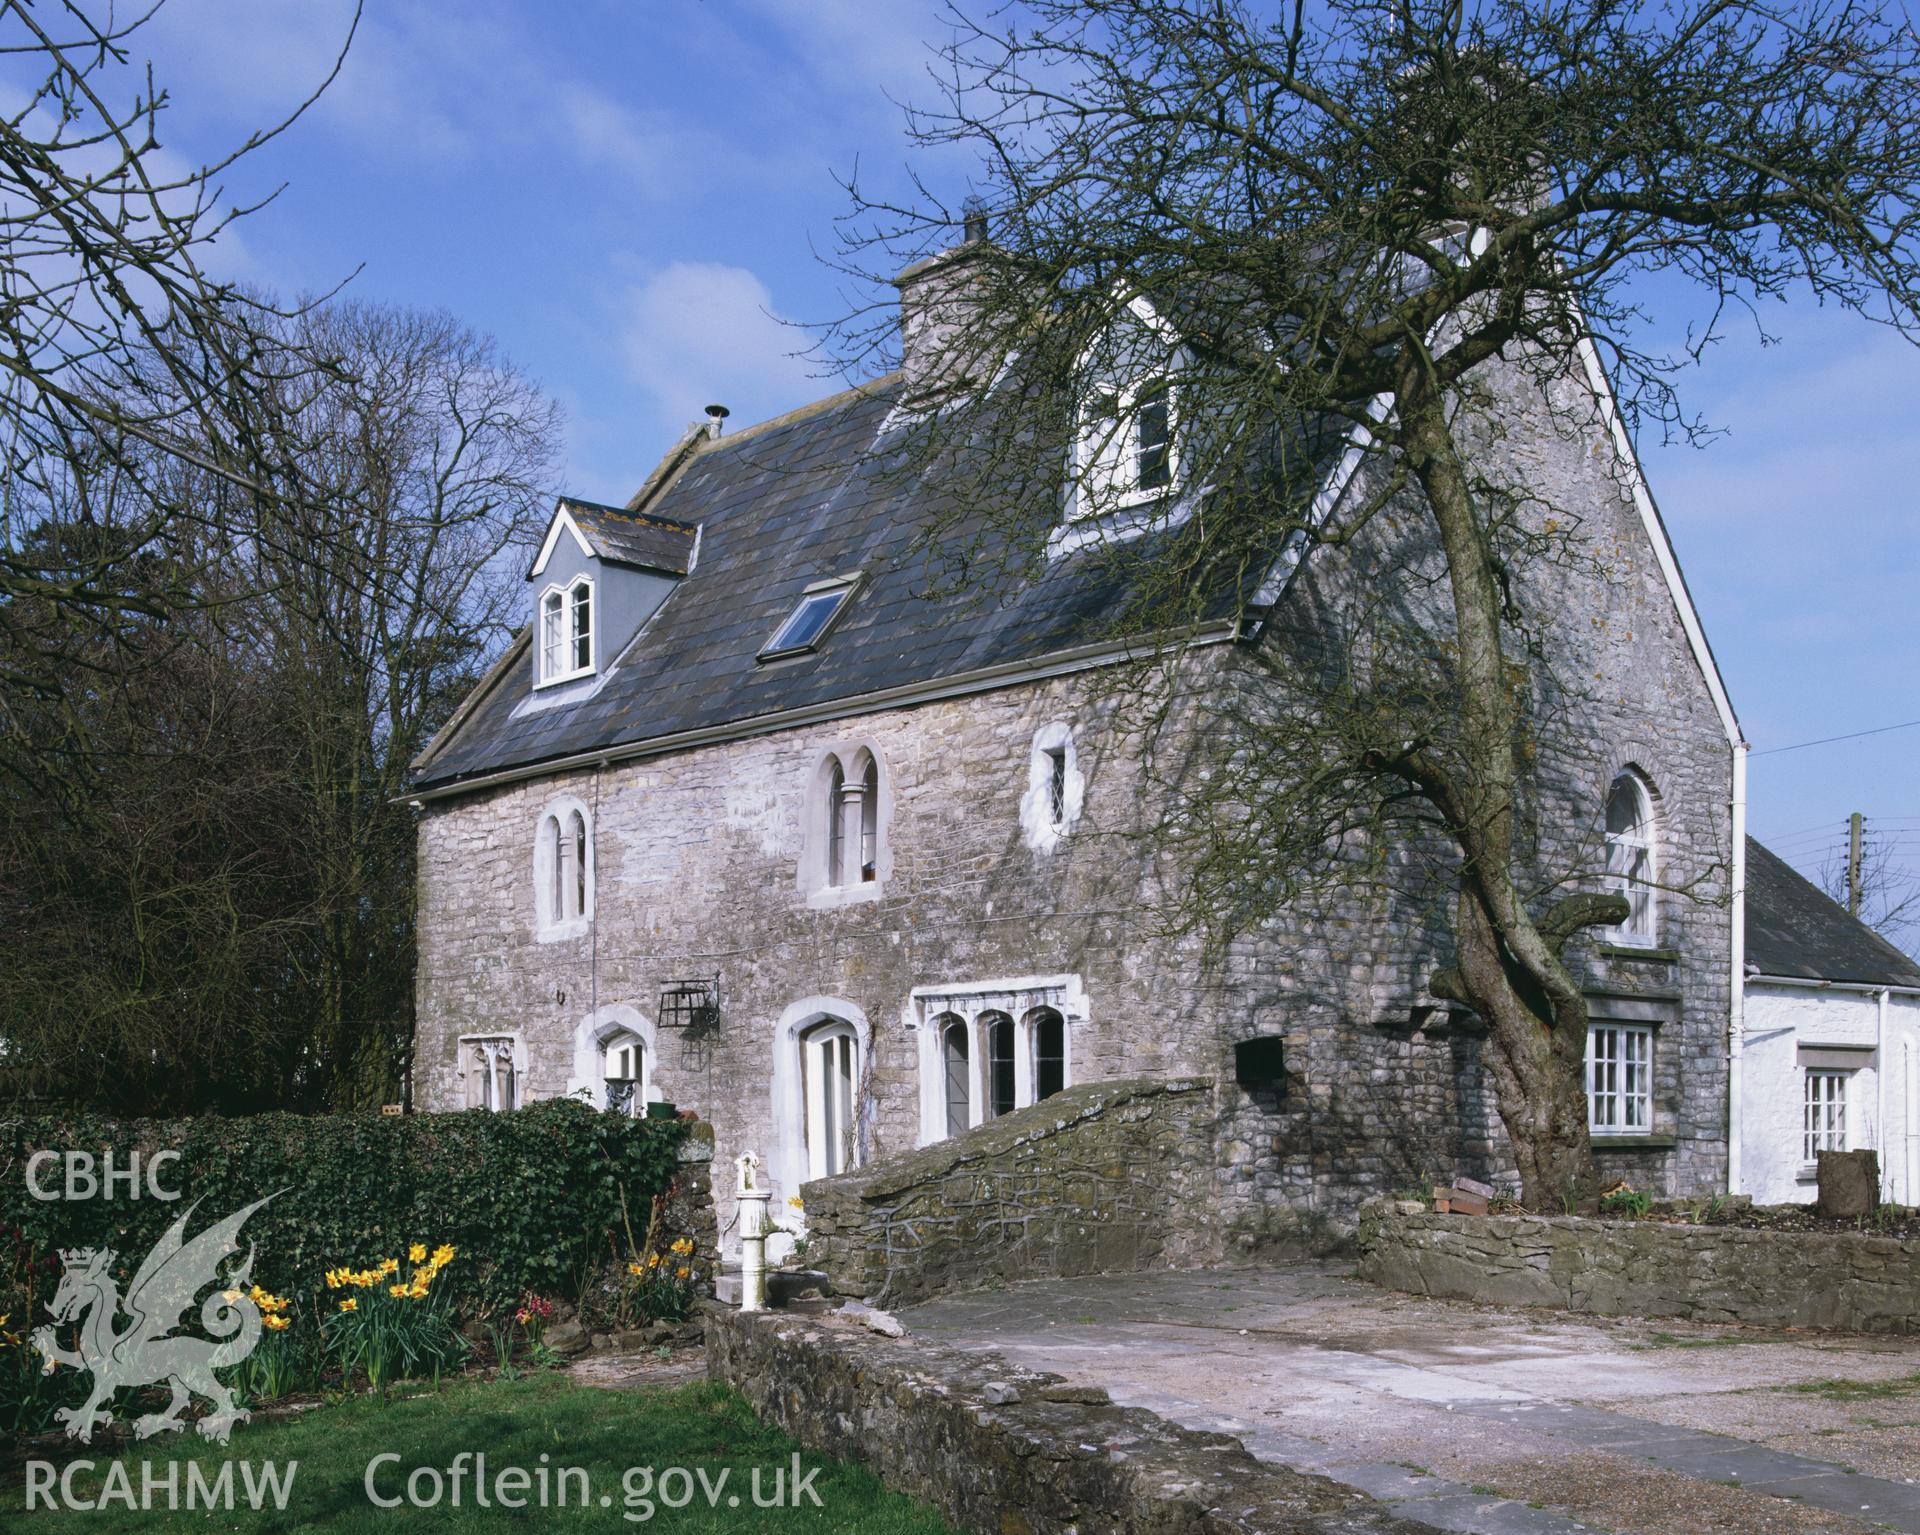 RCAHMW colour transparency showing view of Old Rectory, Llanfair